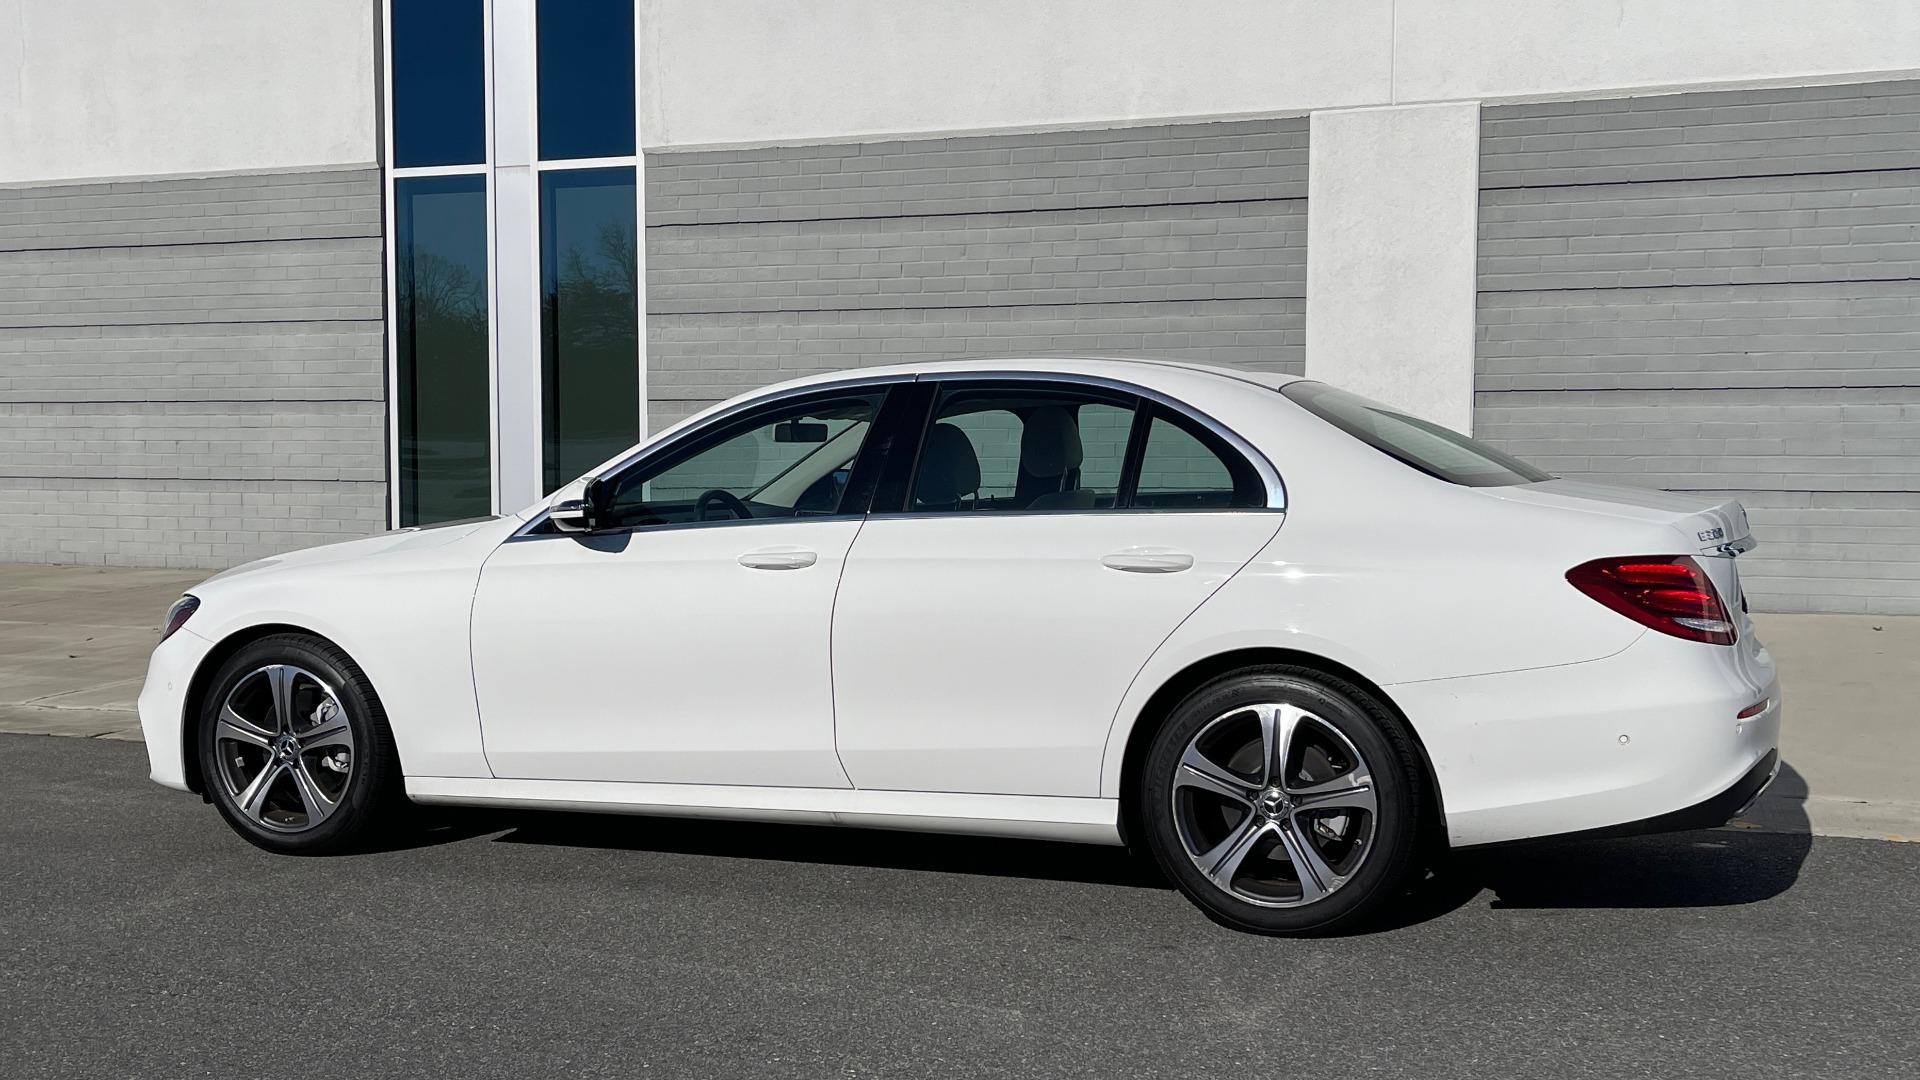 Used 2018 Mercedes-Benz E-CLASS E 300 2.0L SEDAN / RWD / 9-SPD AUTO / BLIND SPOT ASSIST / REARVIEW for sale $41,999 at Formula Imports in Charlotte NC 28227 3